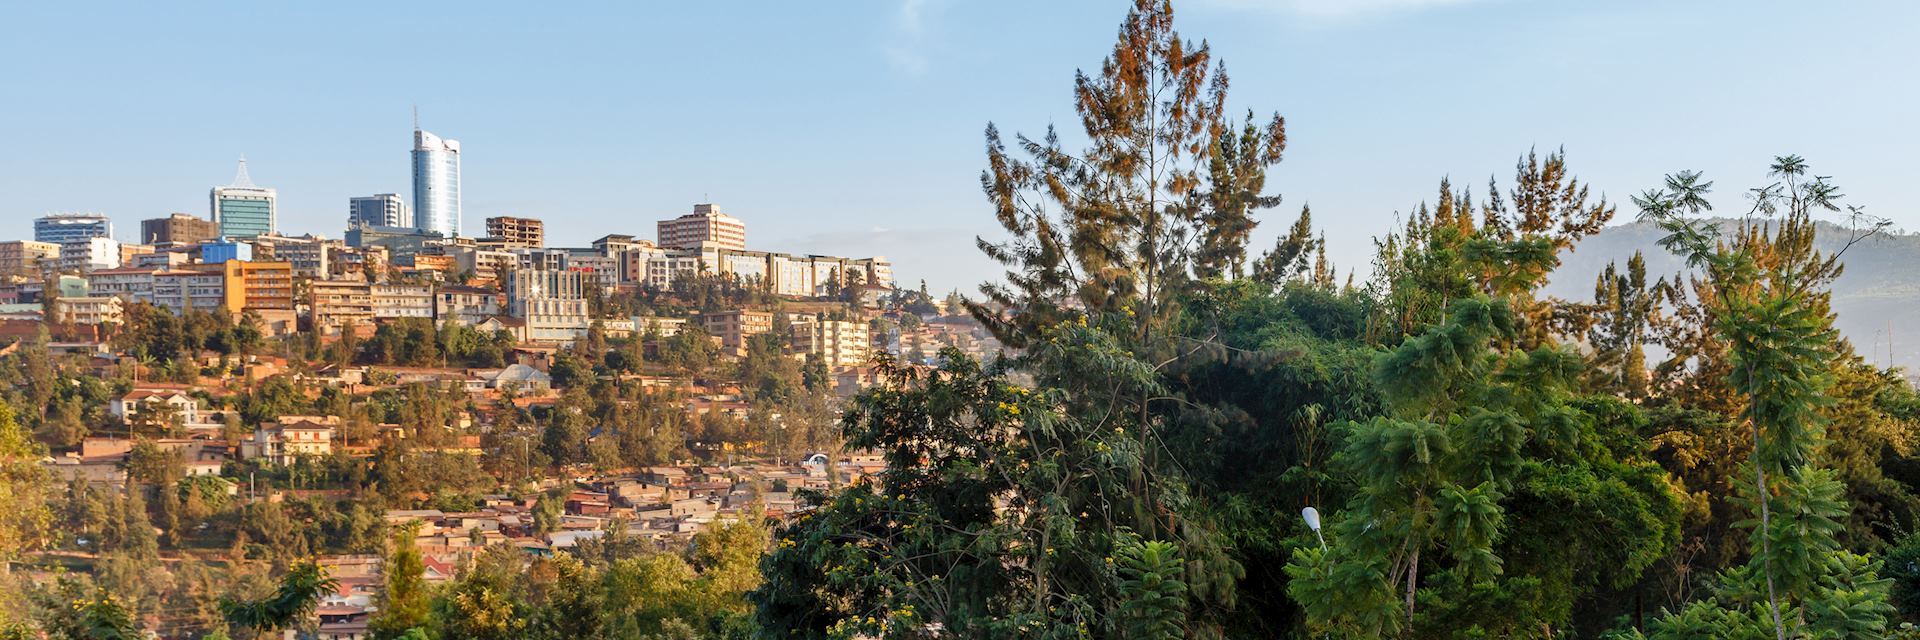 View of Kigali from the Genocide Memorial